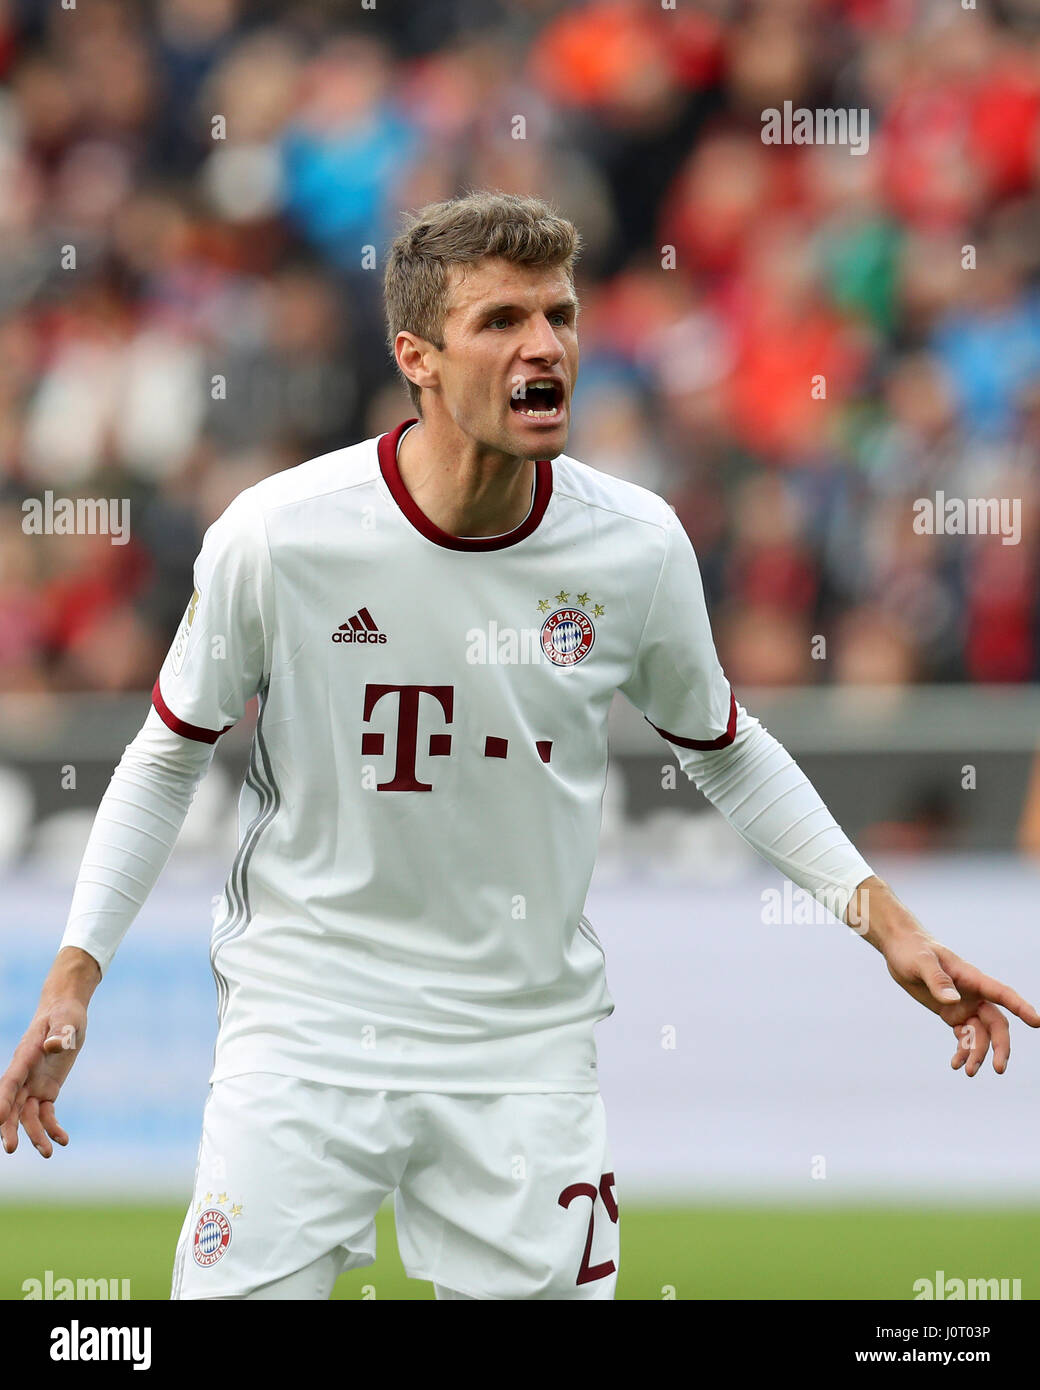 Leverkusen. 15th Apr, 2017. Thomas Mueller of Bayern Munich reacts during the Bundesliga soccer match between Bayer 04 Leverkusen and FC Bayern Munich at BayArena Stadium in Leverkusen, Germany on April 15, 2017. The match ended with a 0-0 draw. Credit: Joachim Bywaletz/Xinhua/Alamy Live News Stock Photo